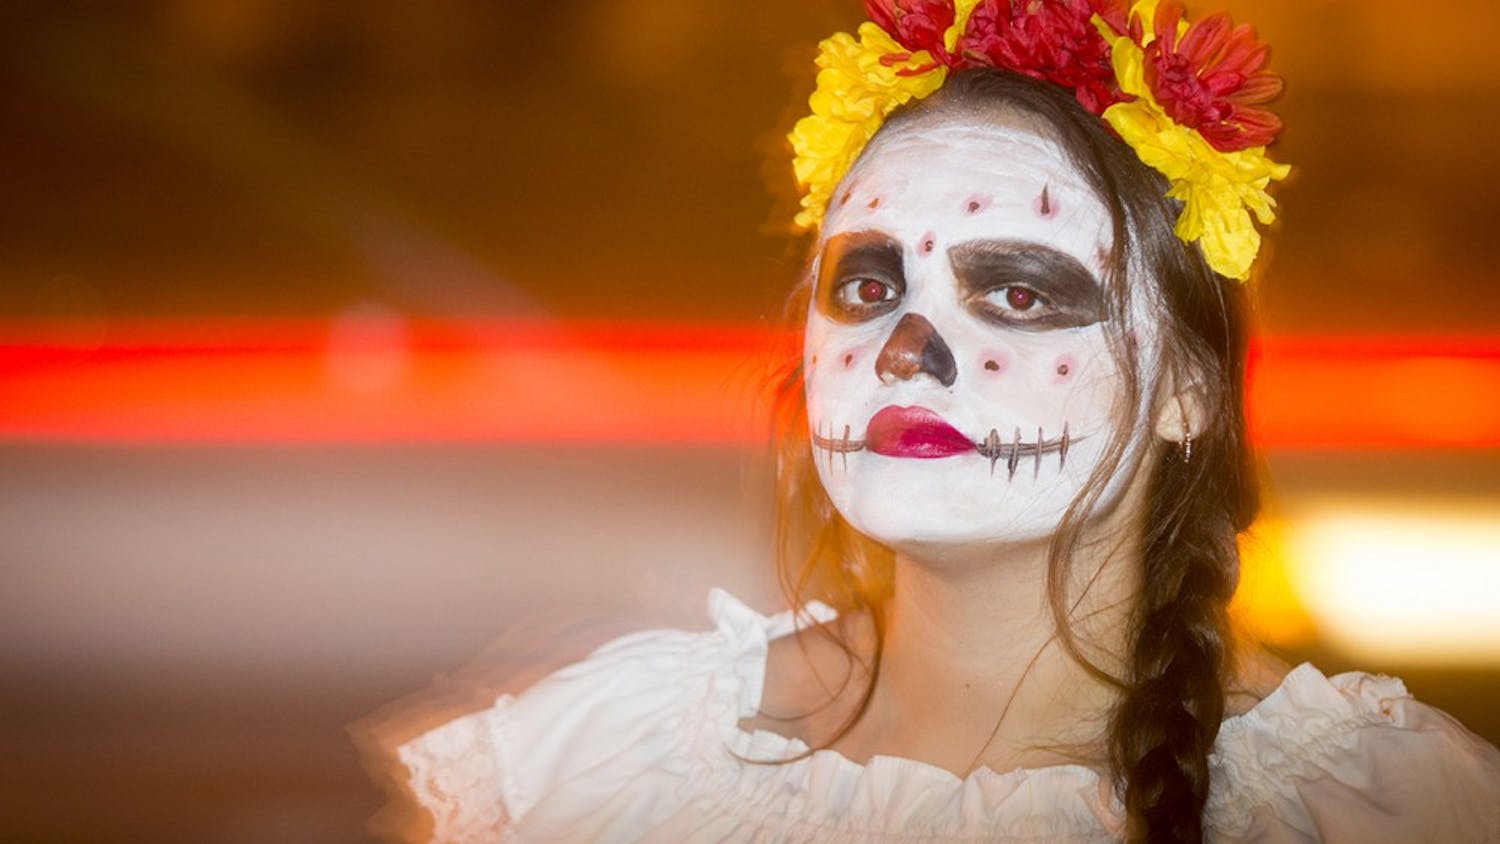 Sophomore Angelica Navarro greets students as they enter La Casa during the Dia de los Muertos event on Wednesday evening. Students in traditional dress were scattered around La Casa, Canterbury House, and the GLBT Student Support Services to provide information and background on the two-day event.